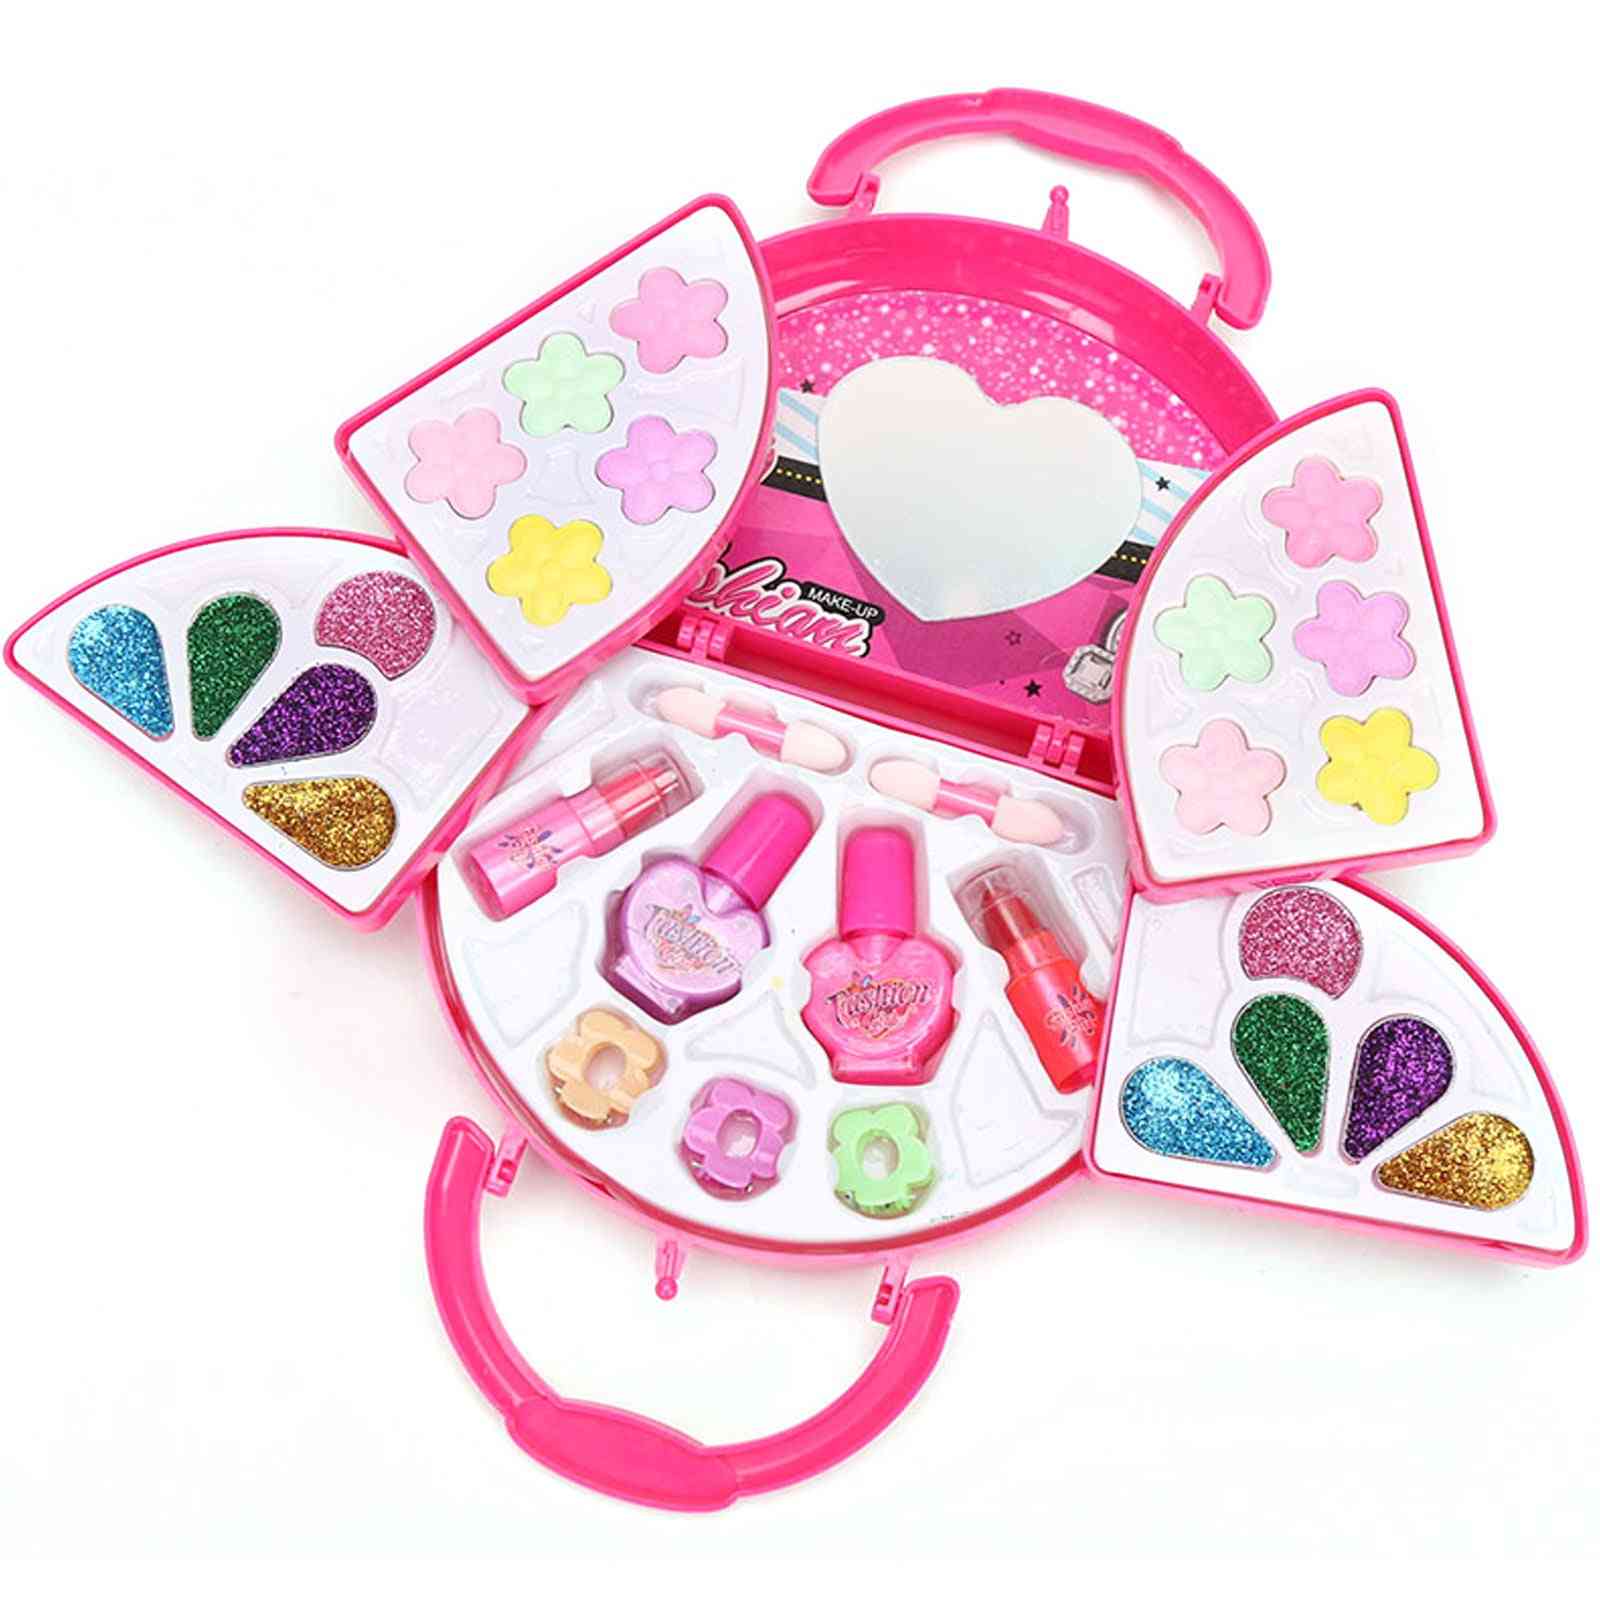 Washable Cosmetic Pretend Play Make Up